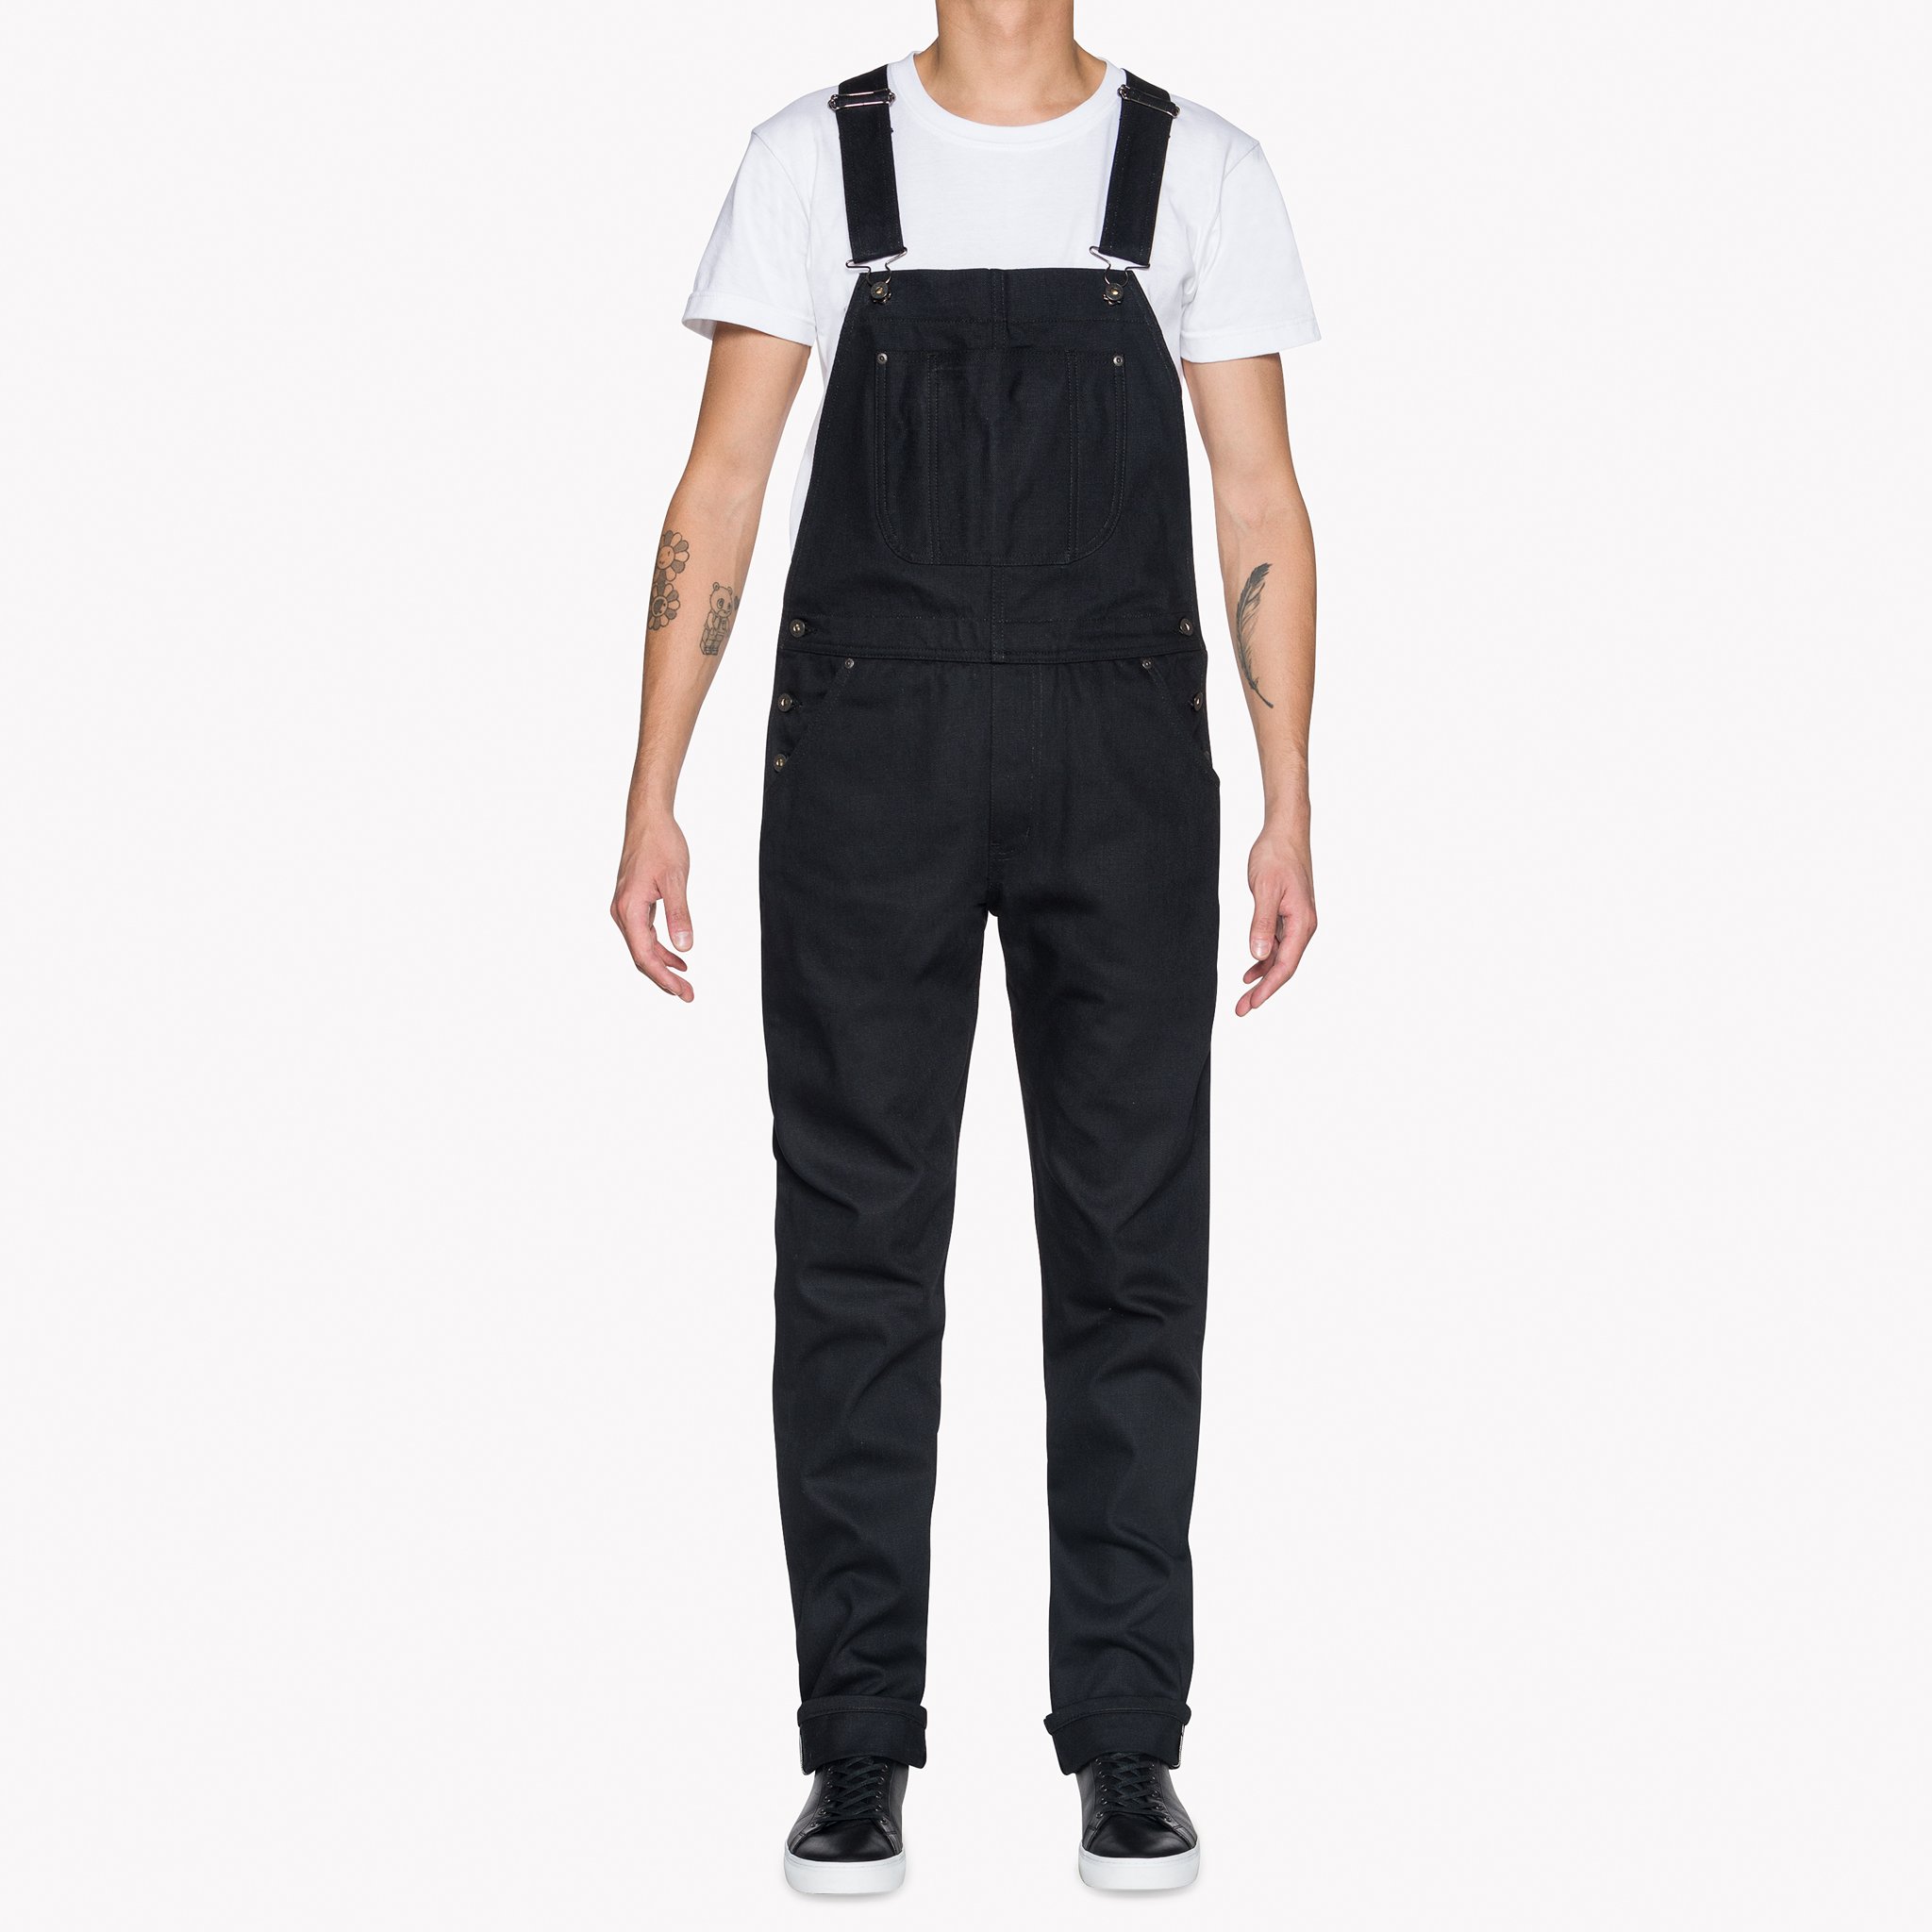  Overalls - Solid Black Selvedge - Front On Model 